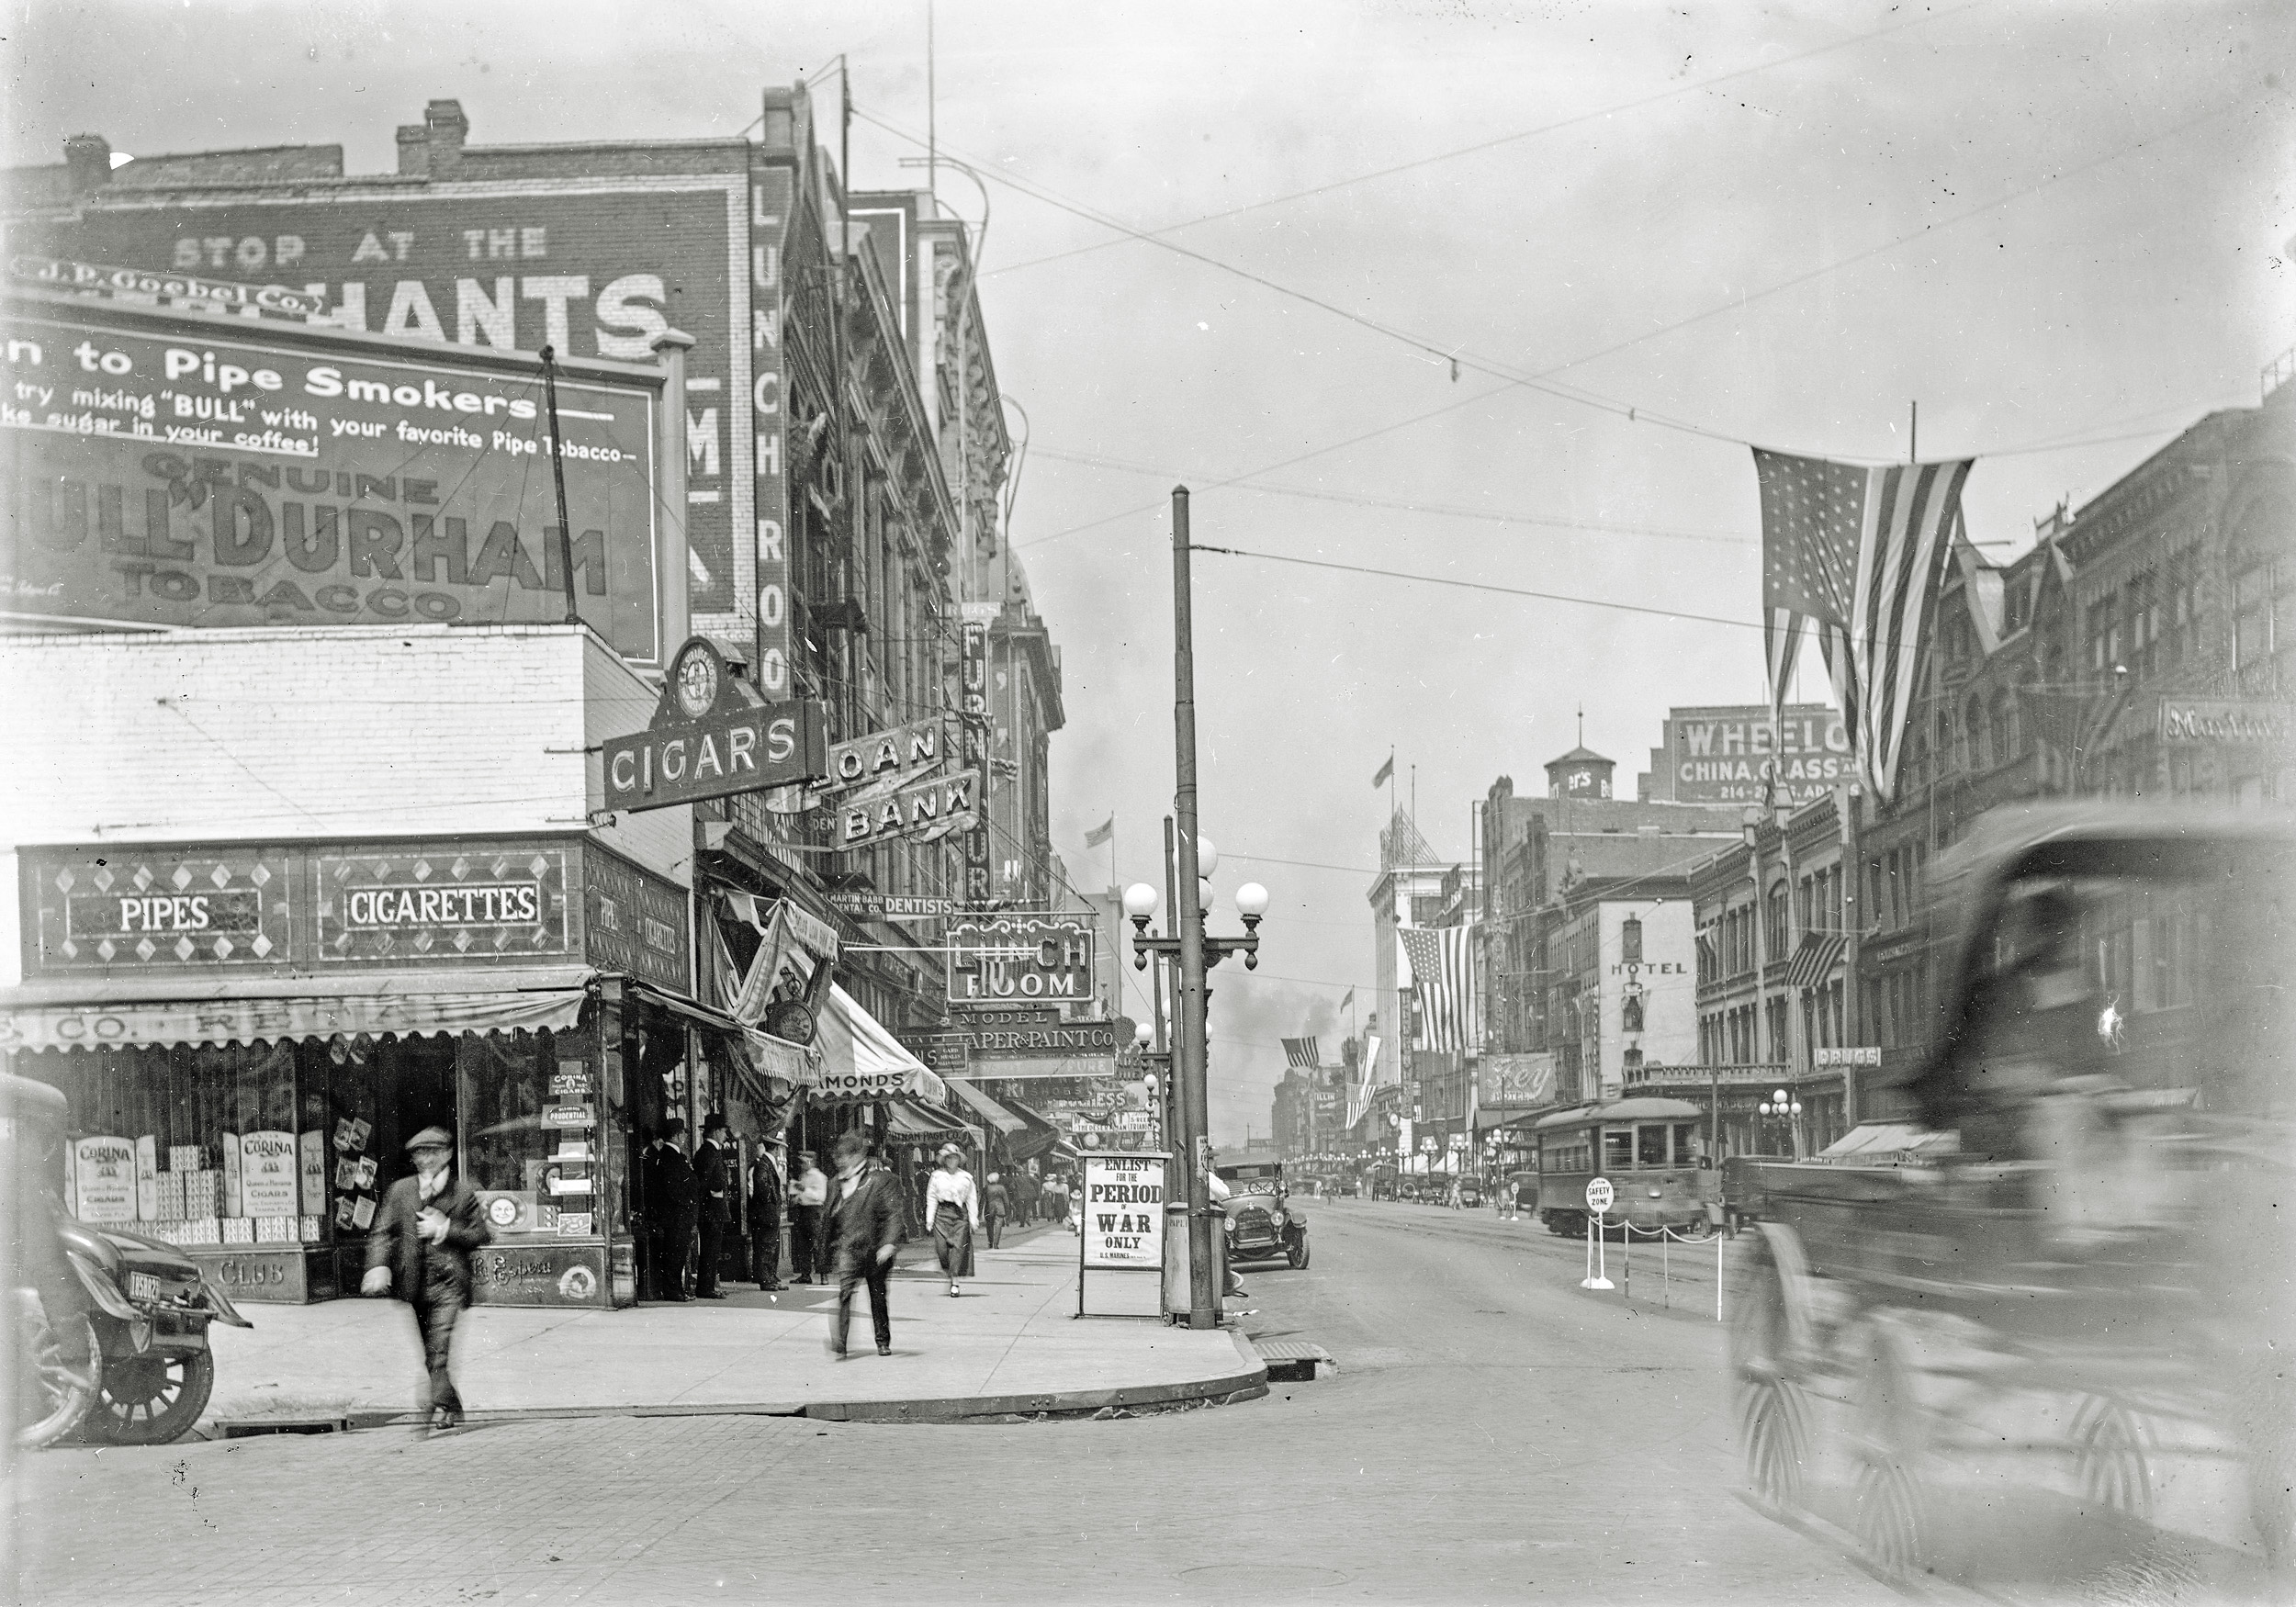 The 300 to 100 Downtown Block of South Adams, Peoria, Illinois Summer of 1917. Hotel d'Europe/Fey Hotel and Wheelock's China, Glass and Lamps in the distance. 'Enlist for the Period of War Only, US Marines'. View full size.